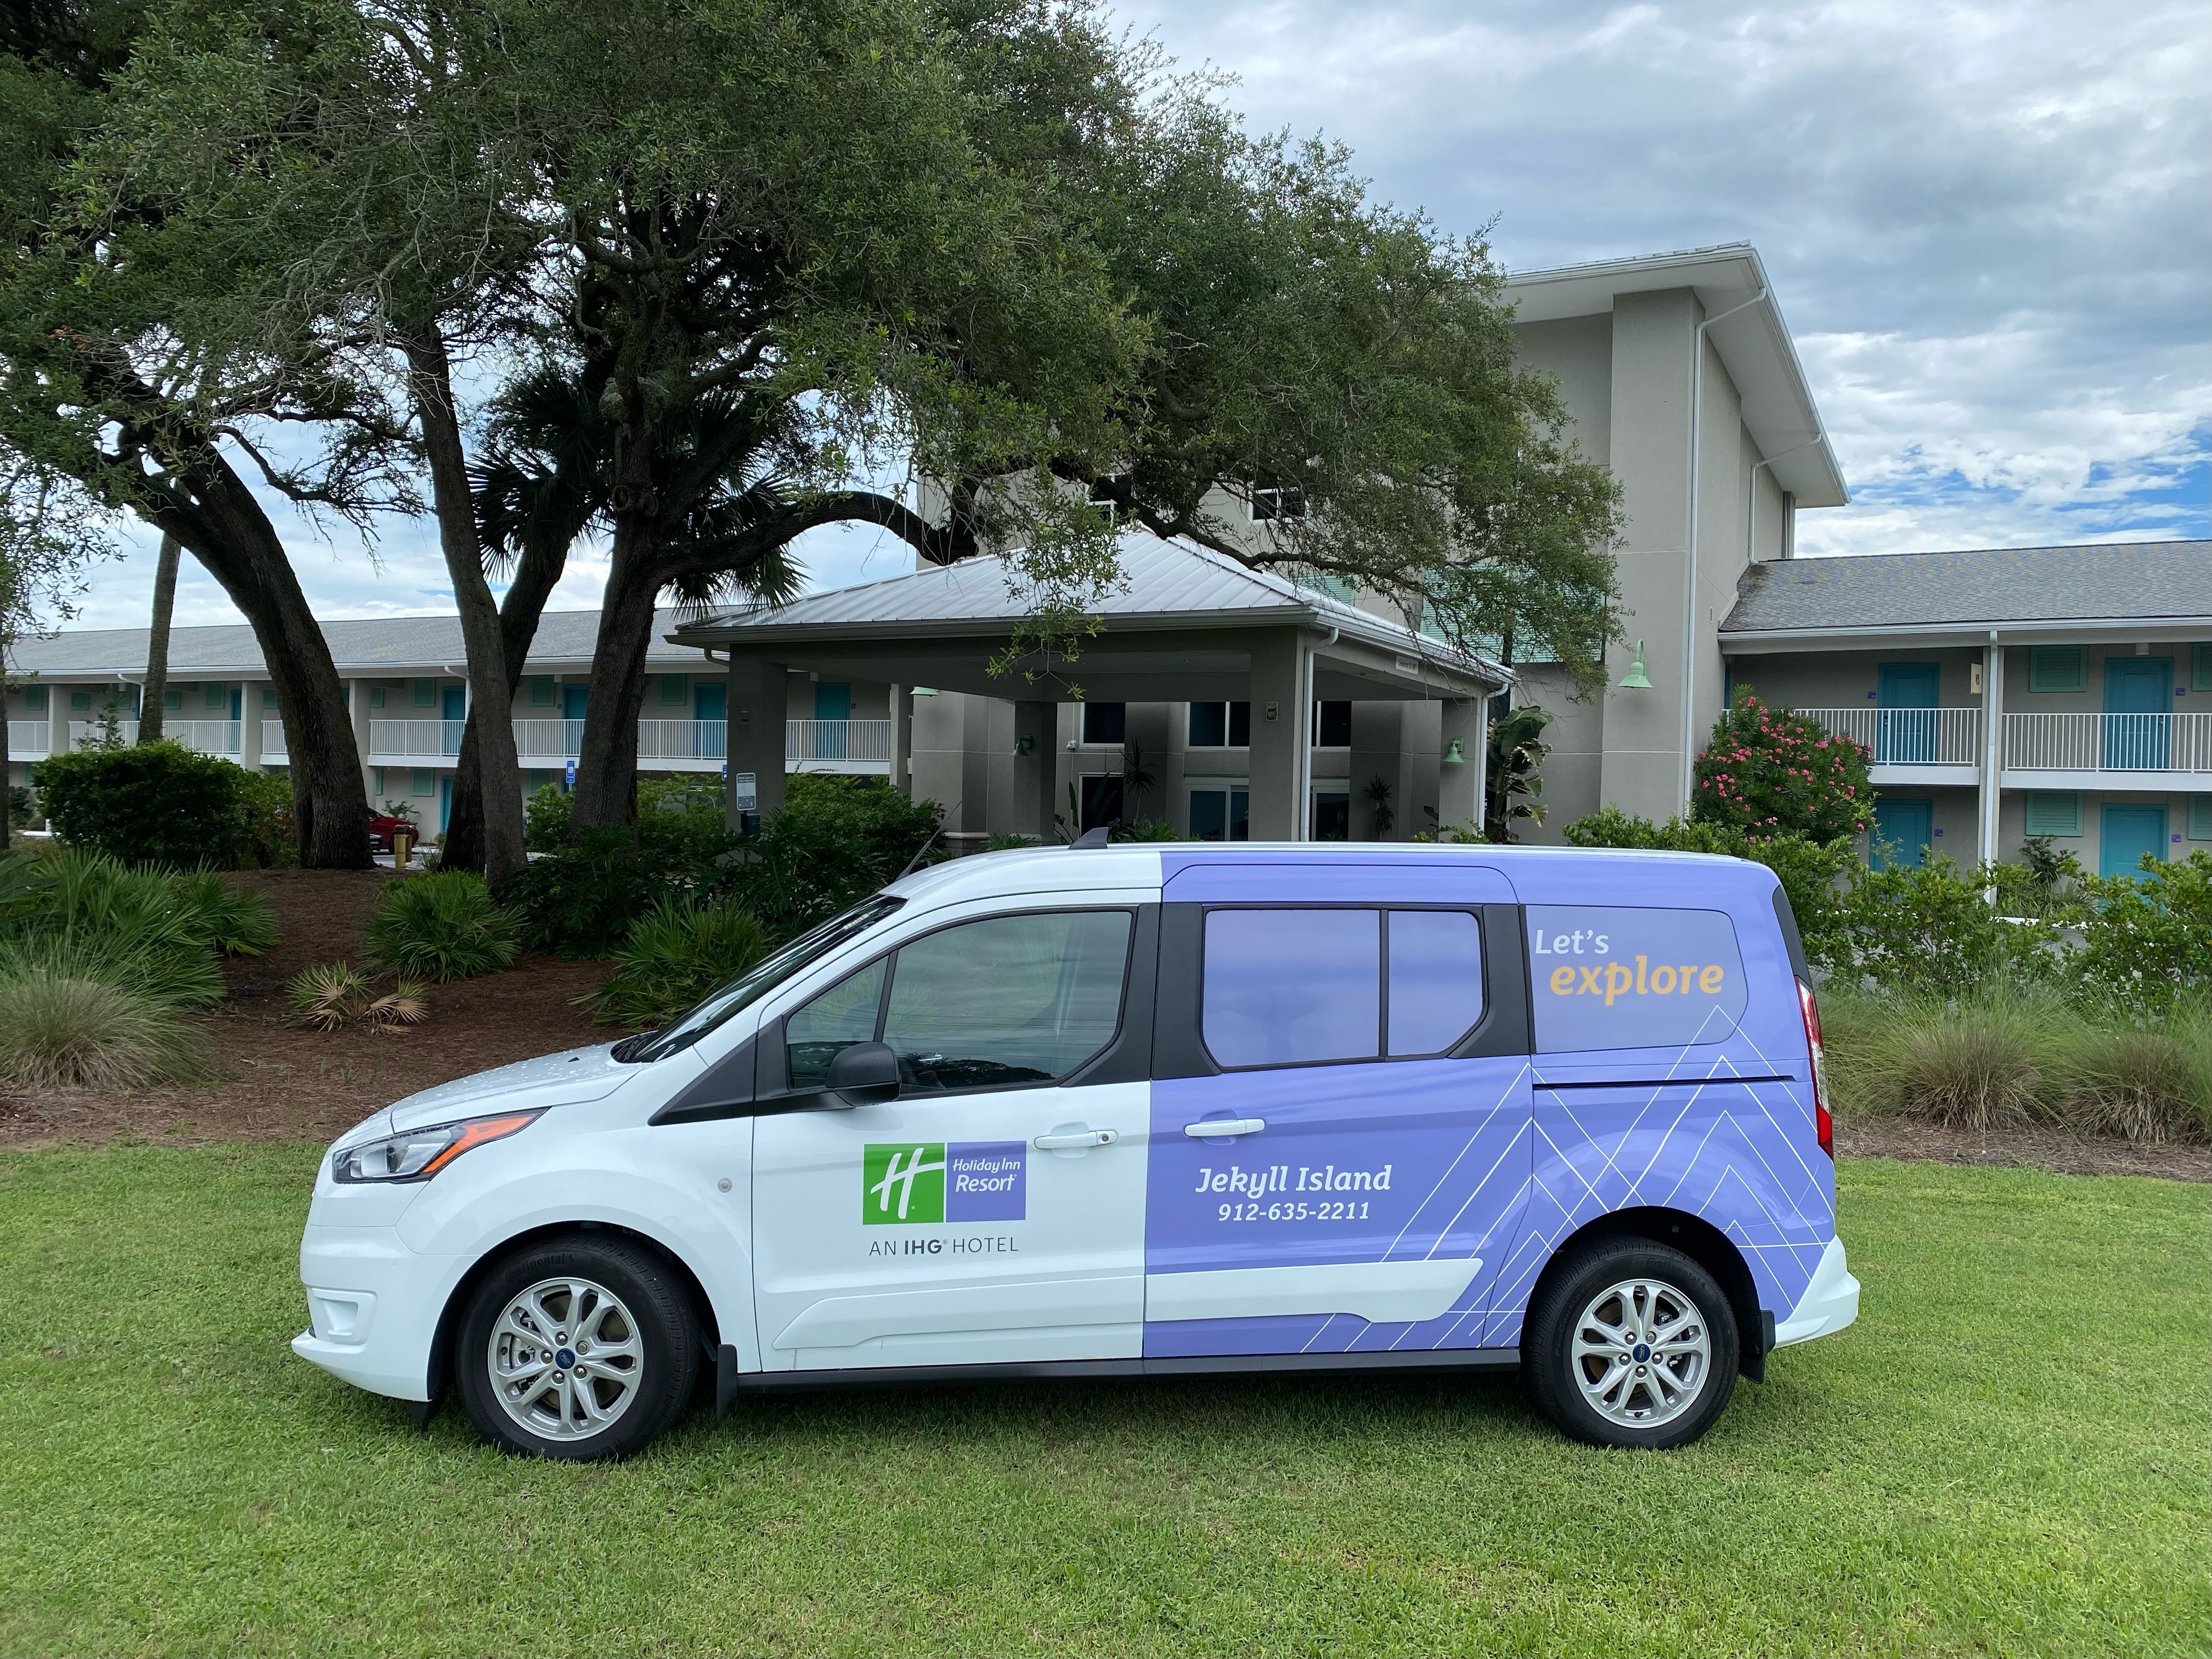 Our shuttle will take you to or from anywhere on Jekyll Island!